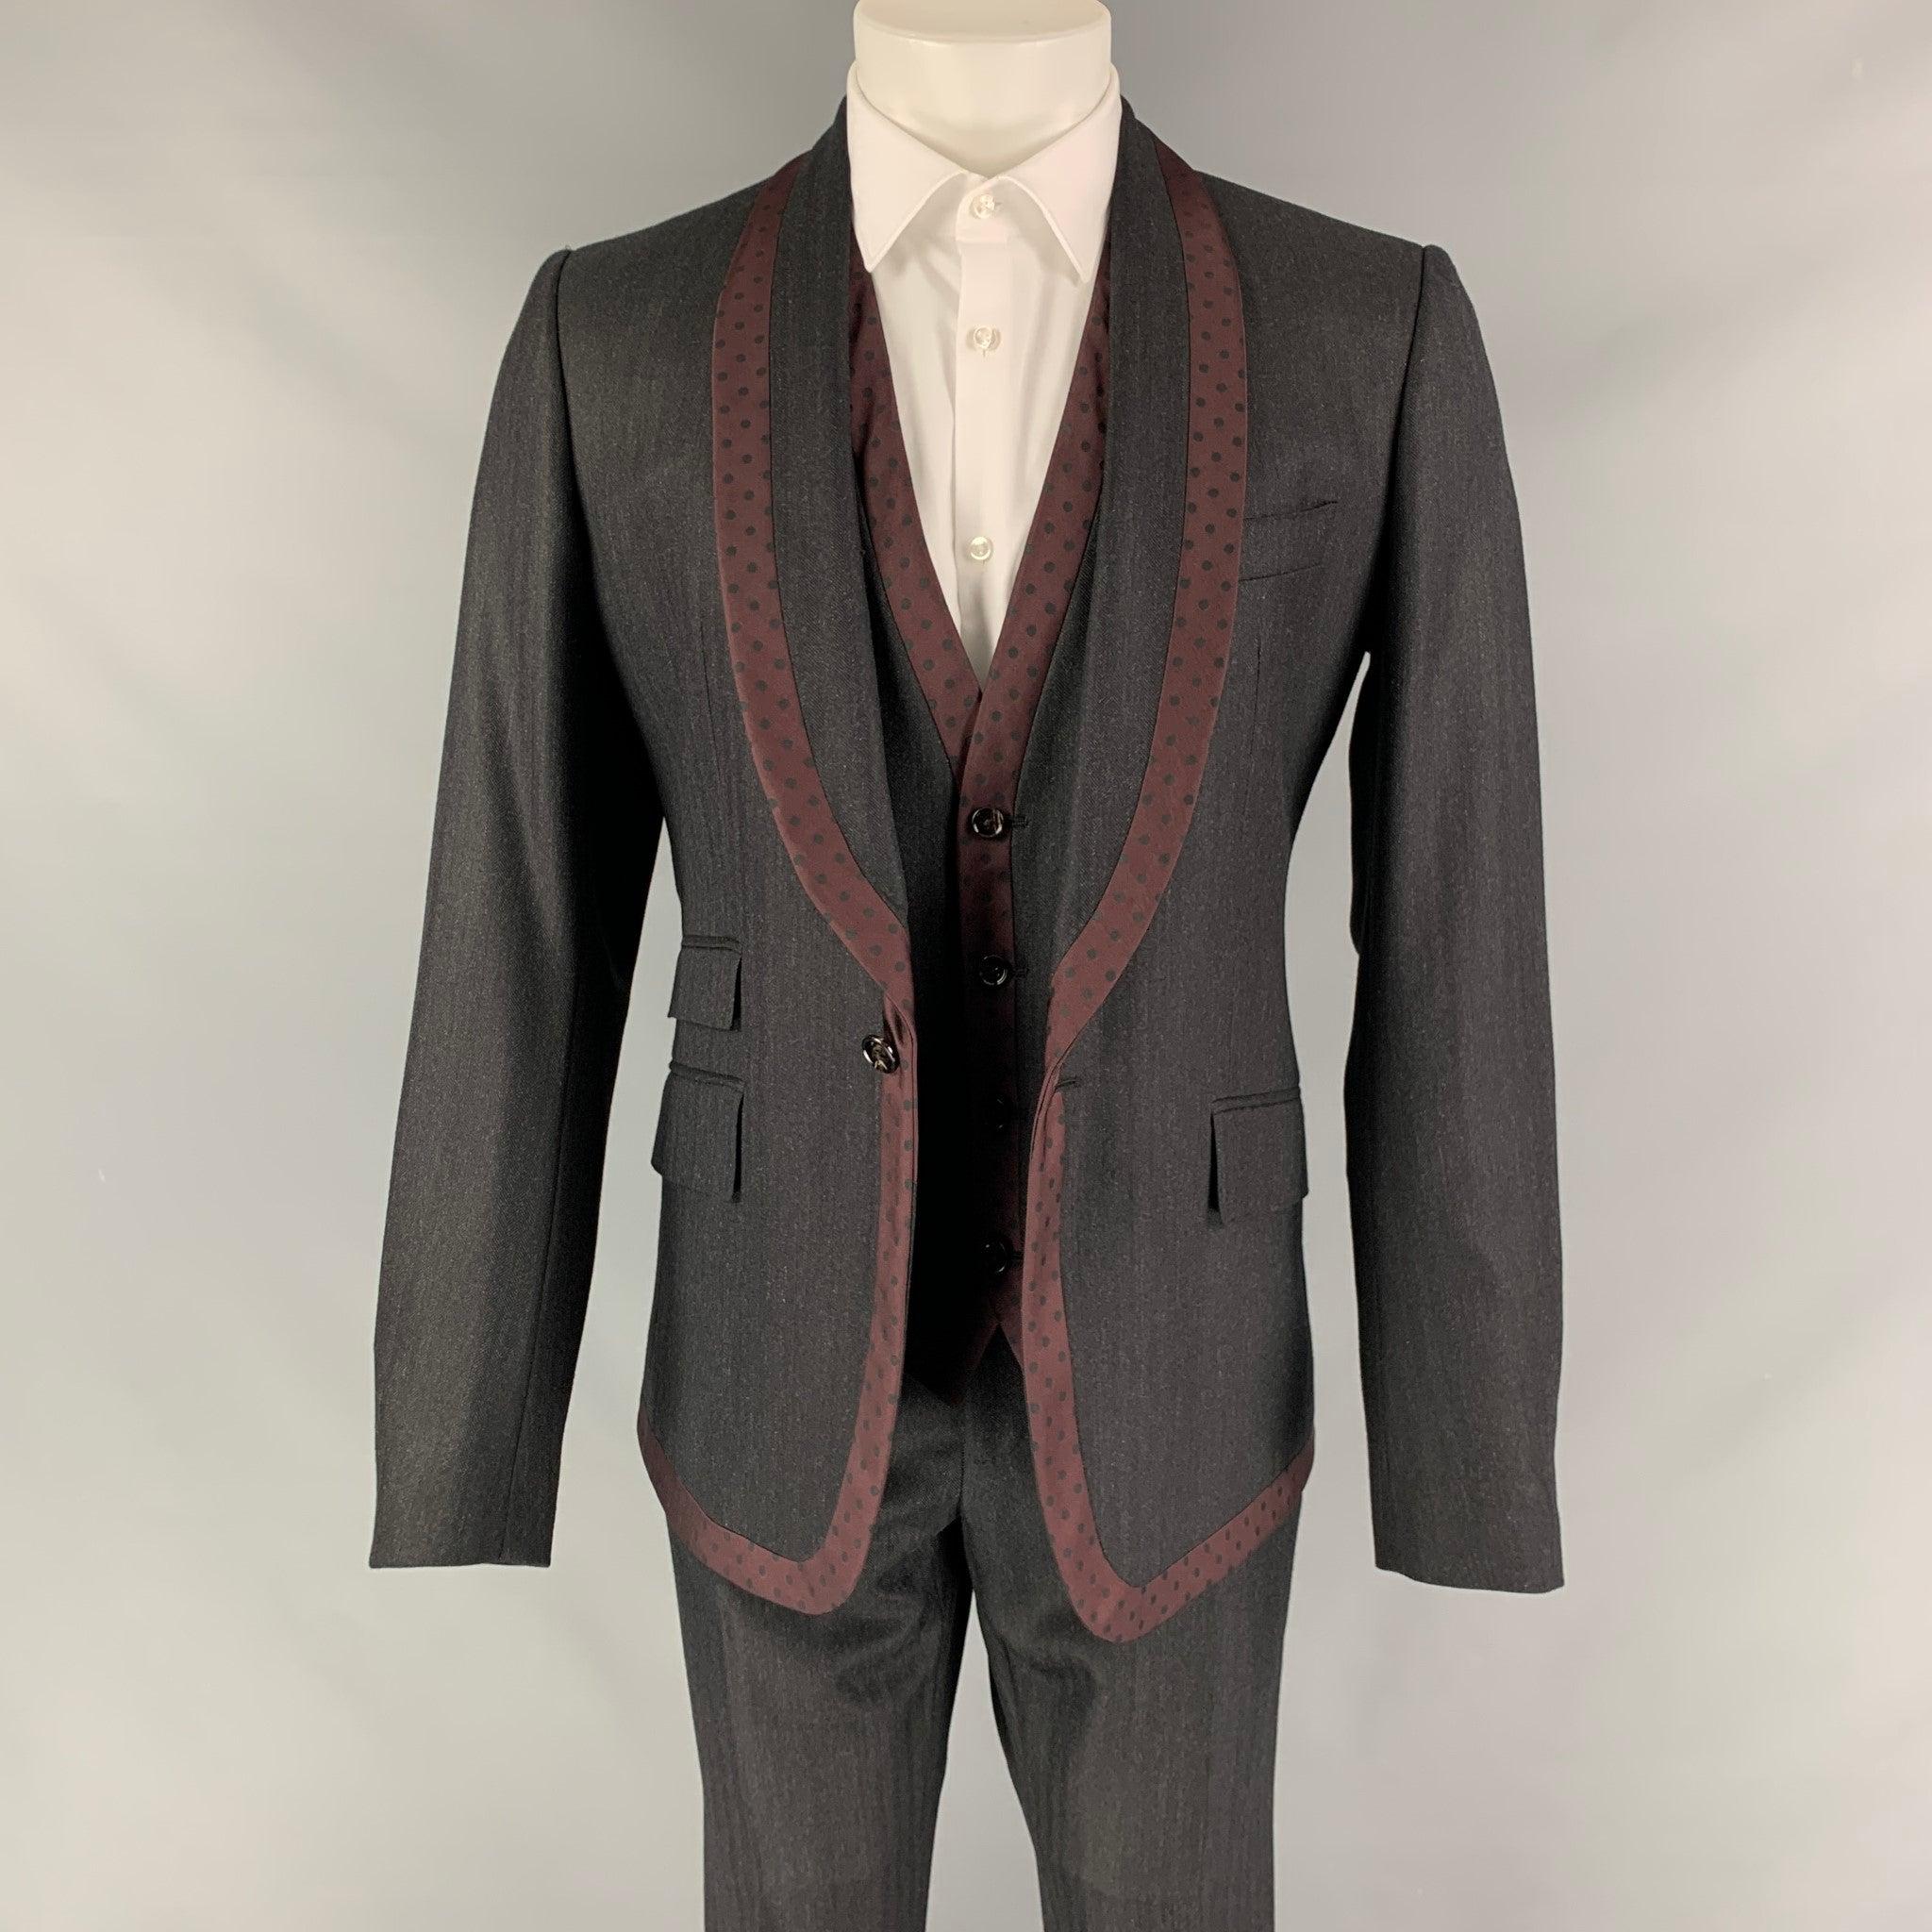 DOLCE & GABBANA 3 Piece suit comes in a grey & burgundy polka dot virgin wool with a full liner and includes a single breasted, single button sport coat with a shawl collar and a matching vest and flat front trousers. Waist and length of pants need